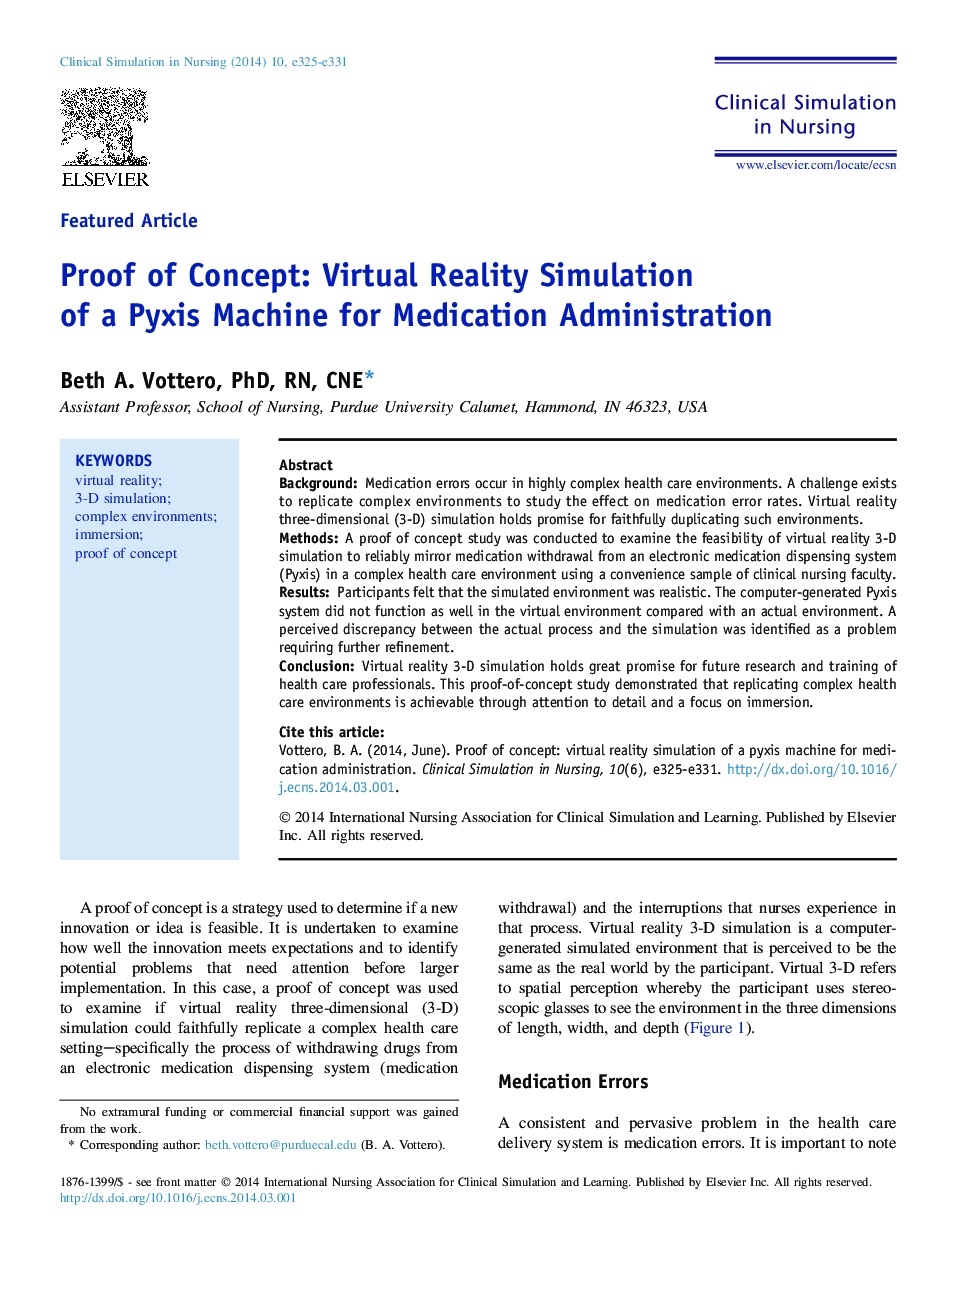 Proof of Concept: Virtual Reality Simulation of a Pyxis Machine for Medication Administration 